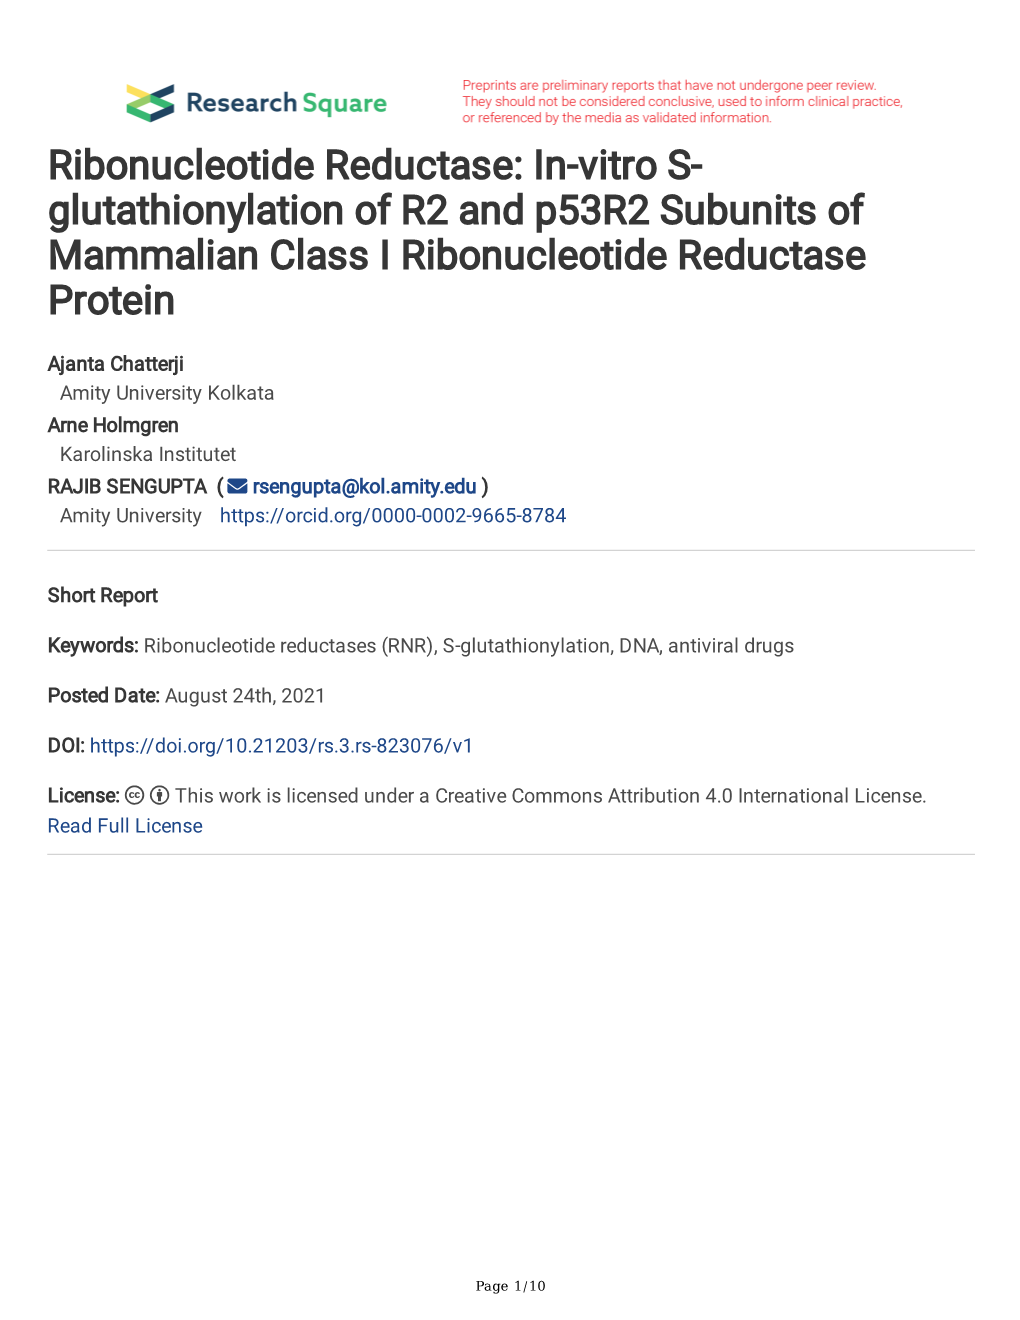 Ribonucleotide Reductase: In-Vitro S- Glutathionylation of R2 and P53r2 Subunits of Mammalian Class I Ribonucleotide Reductase Protein